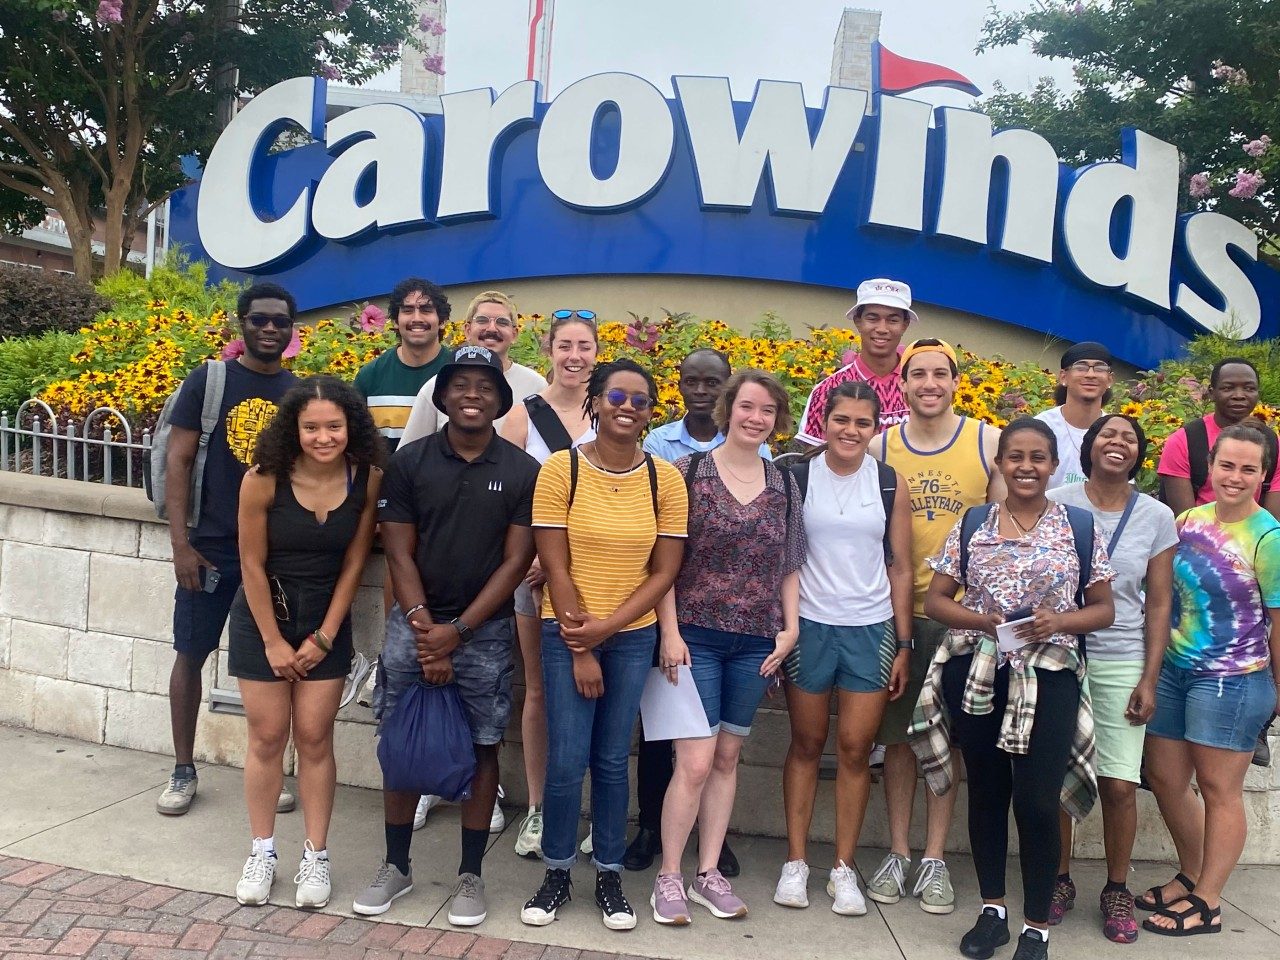 About 20 students pose together in front of the Carowinds sign